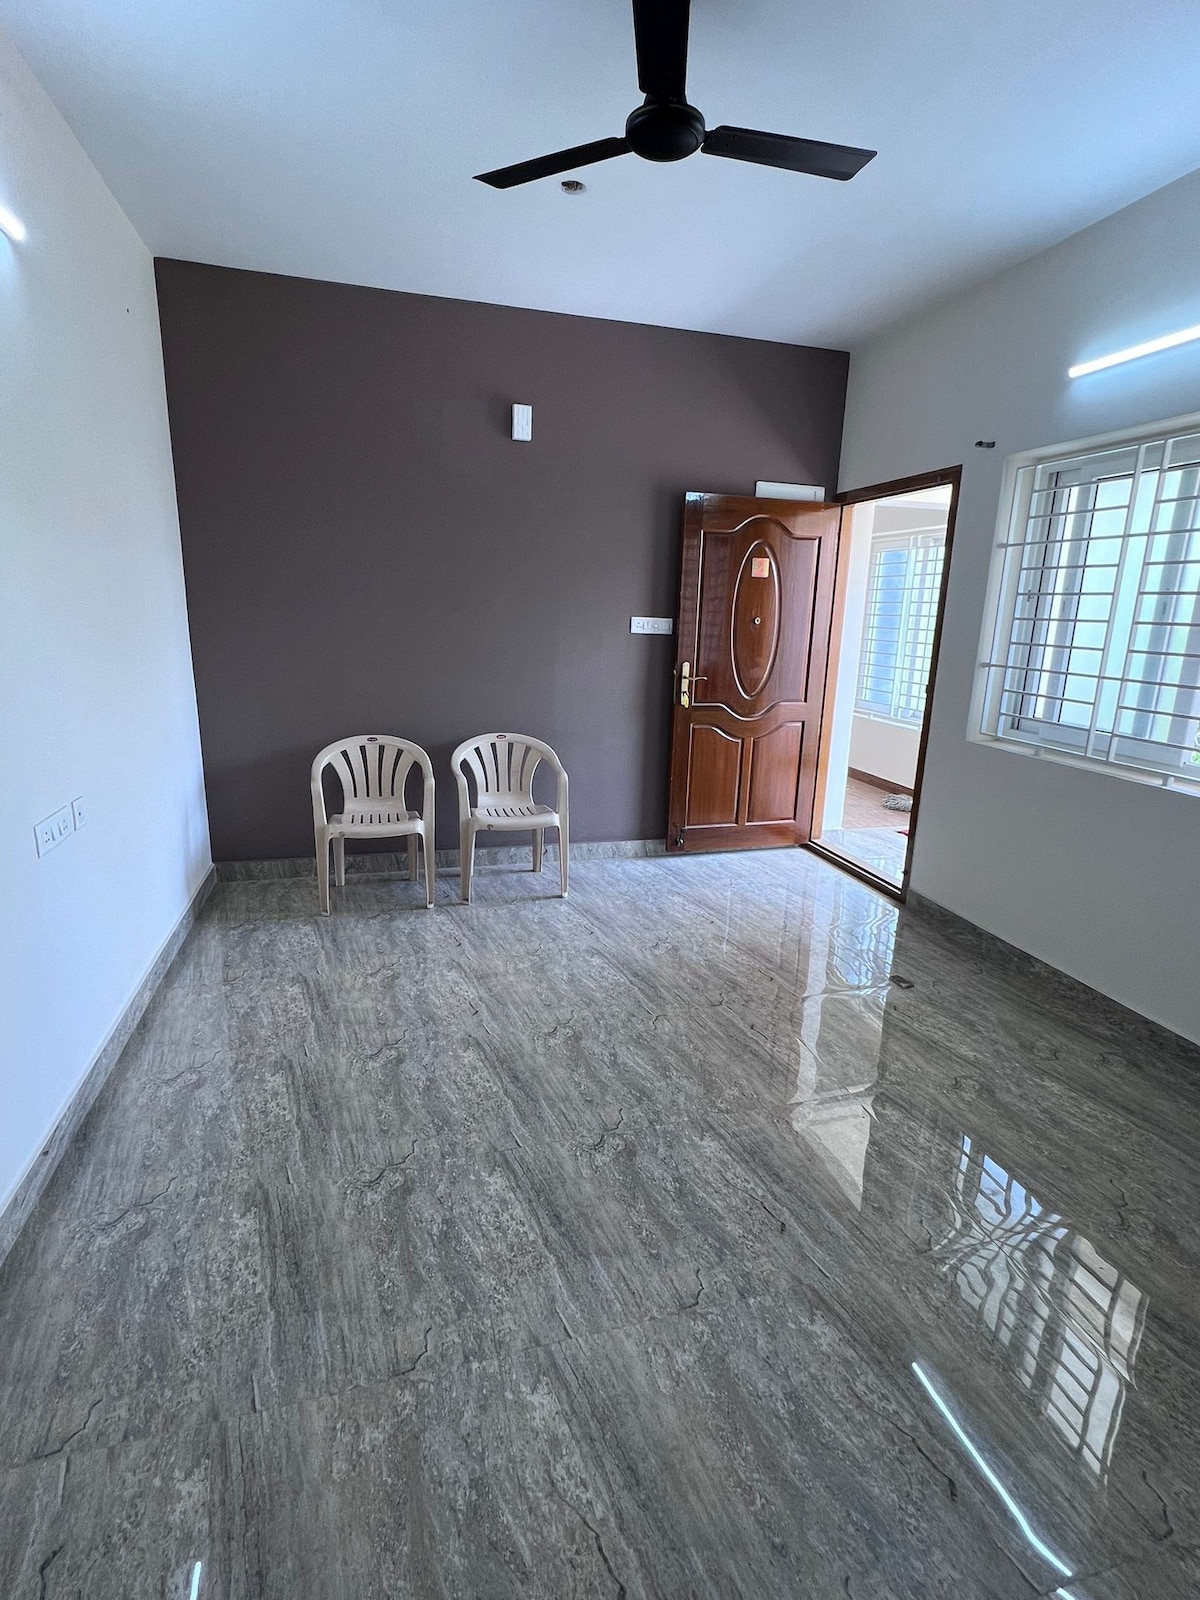 1 BHK fully furnished